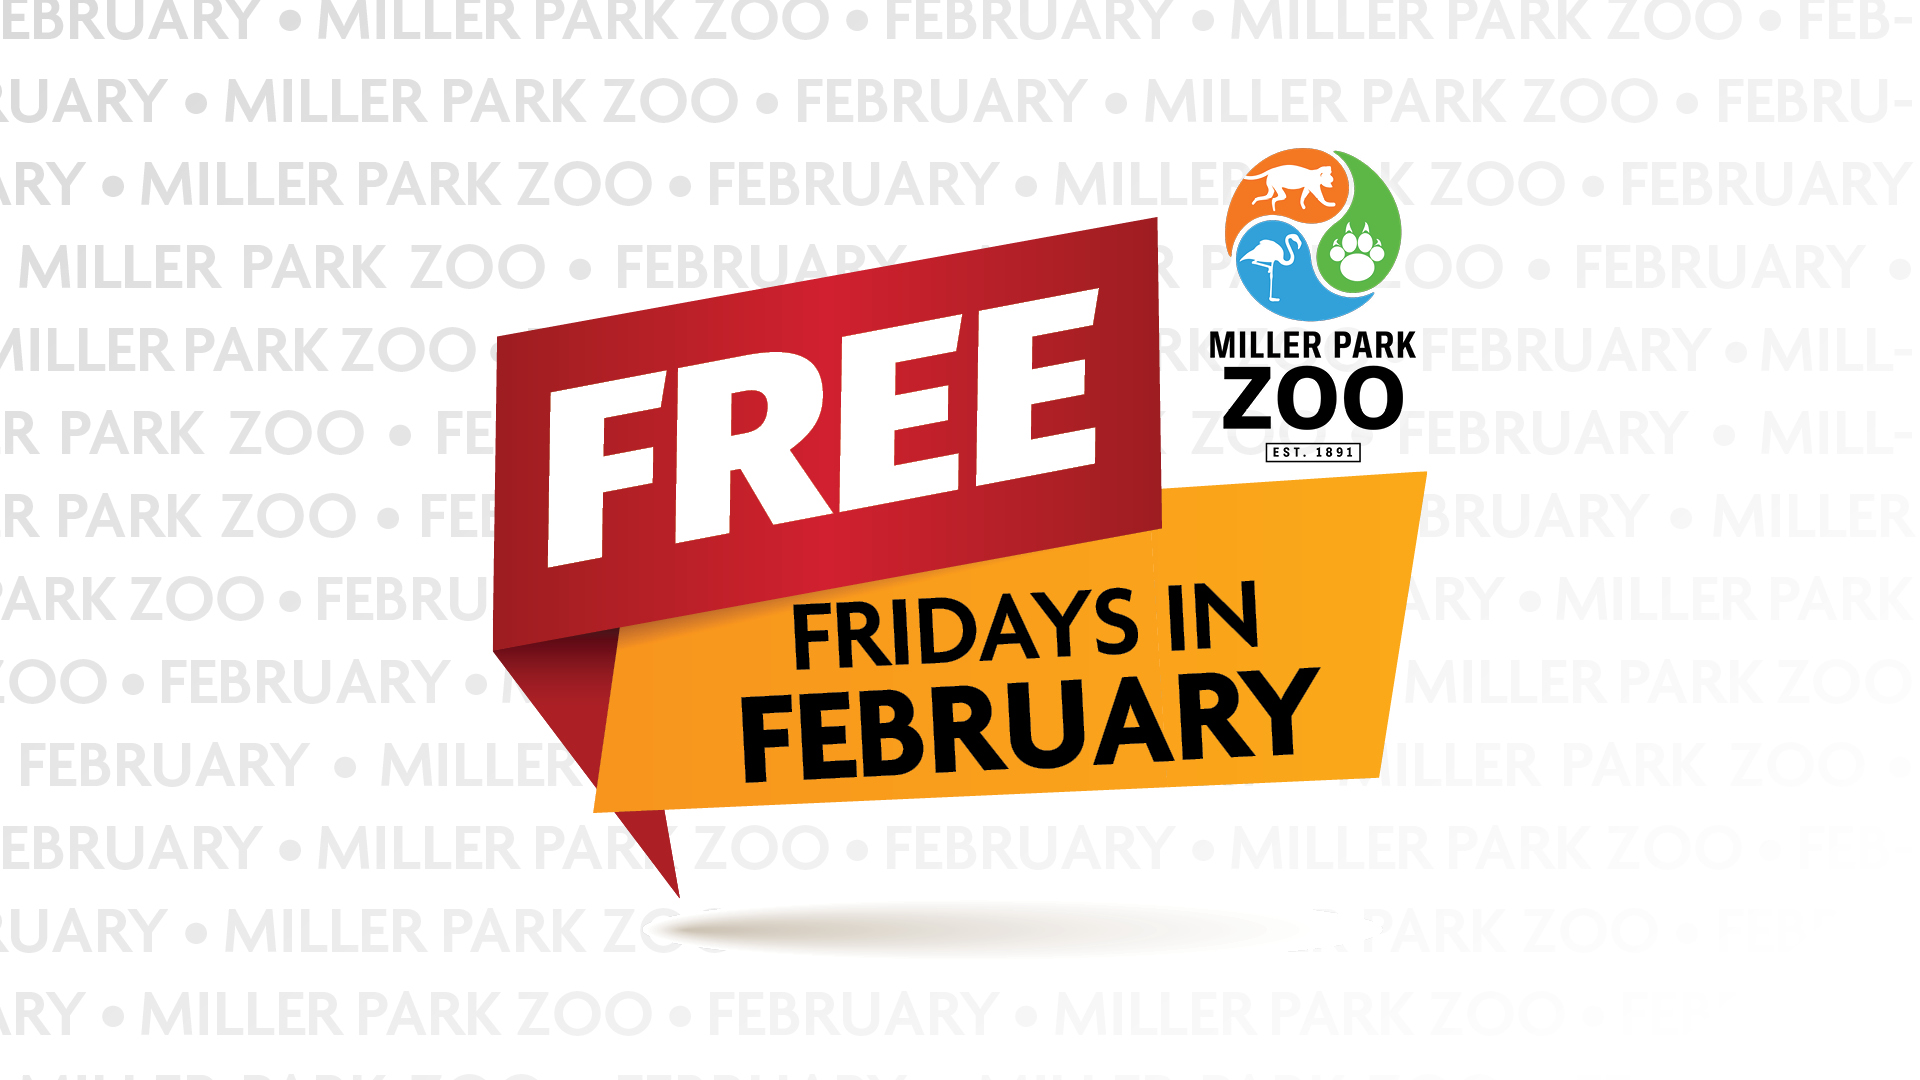 Free Fridays in February at the Zoo